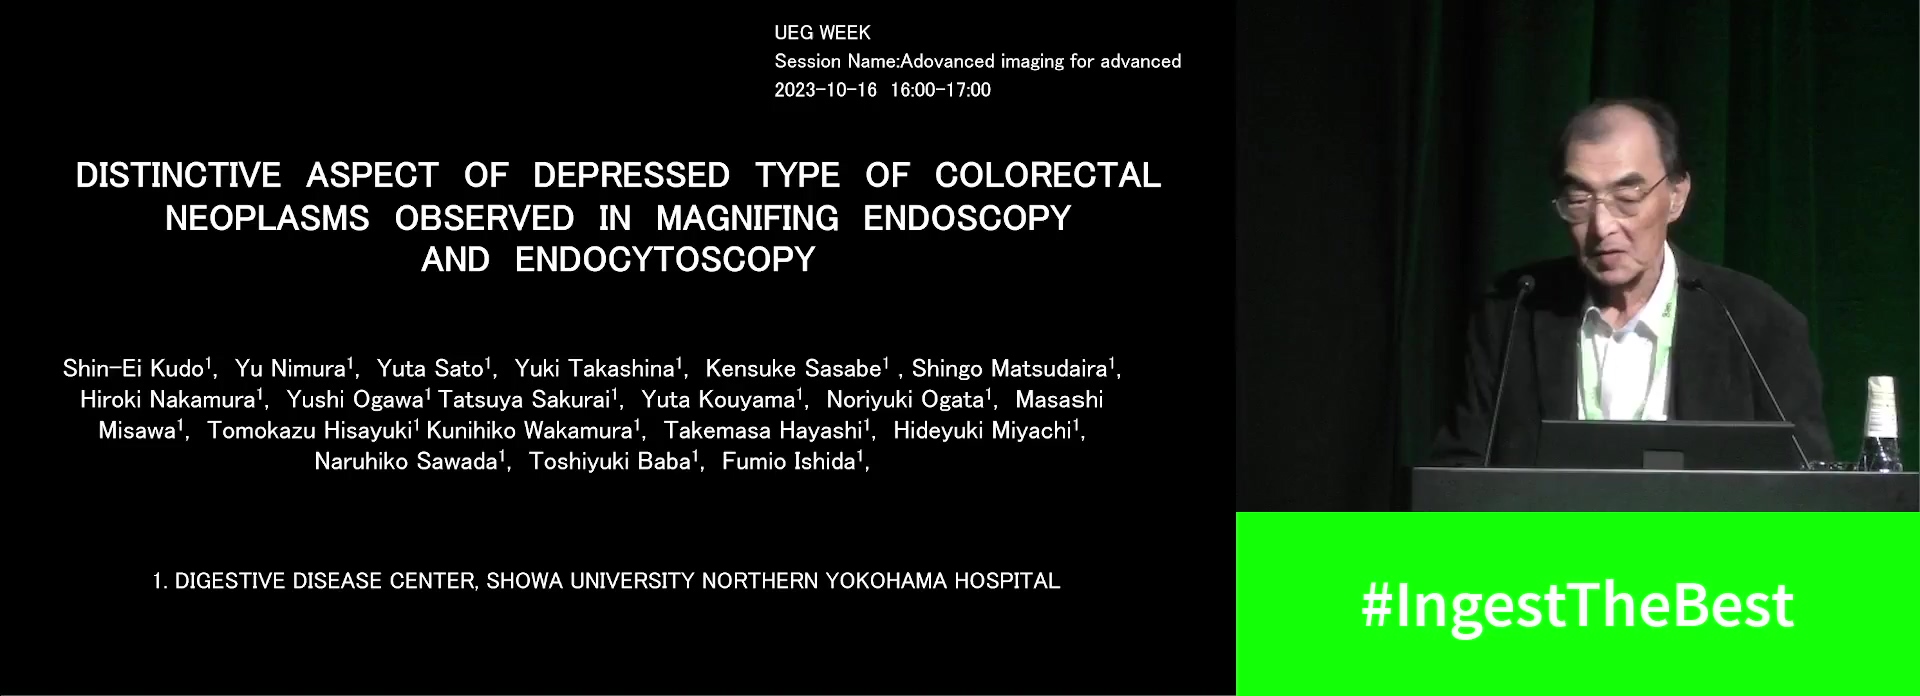 DISTINCTIVE ASPECTS OF DEPRESSED TYPE OF COLORECTAL NEOPLASMS OBSERVED IN MAGNIFYING ENDOSCOPY AND ENDOCYTOSCOPY